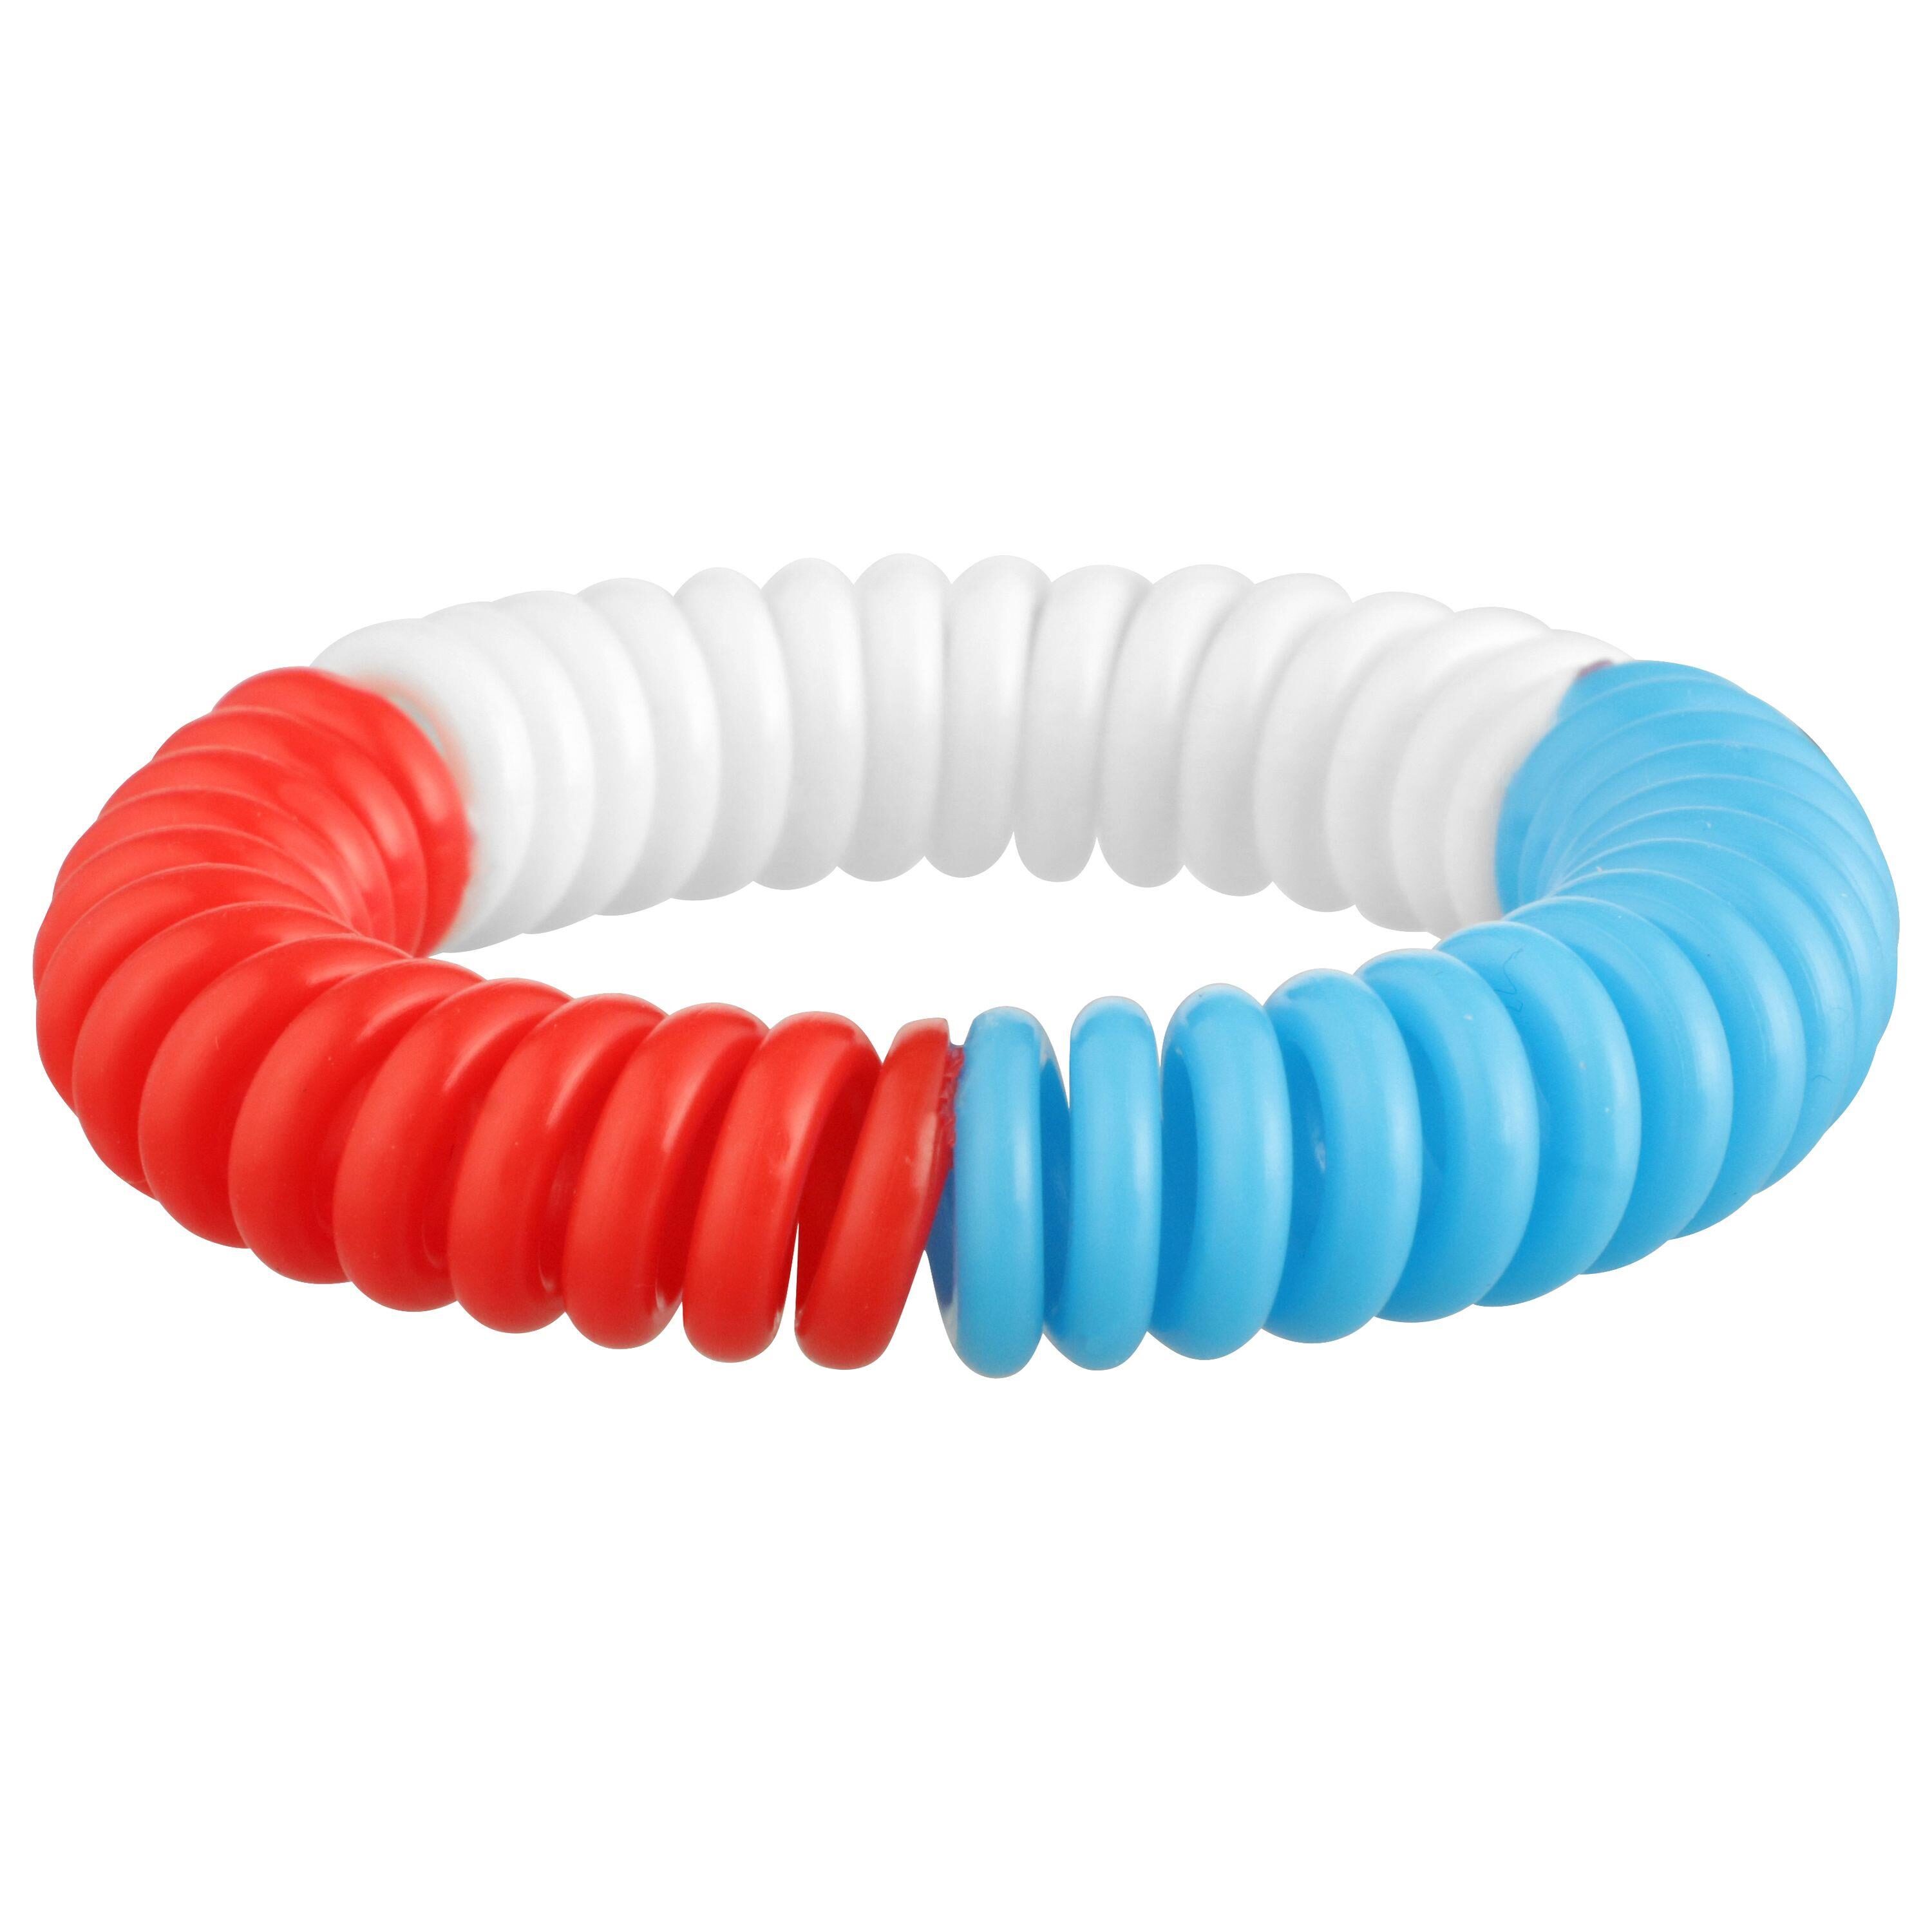 Mosquito Repellent Bracelets 20 Pack,100% Natural Deet-Free Waterproof  Travel Insect Repellent Bands,Non-Toxic Safe Wristband, Outdoor Protection  for Baby Kids and Adults - Newegg.com